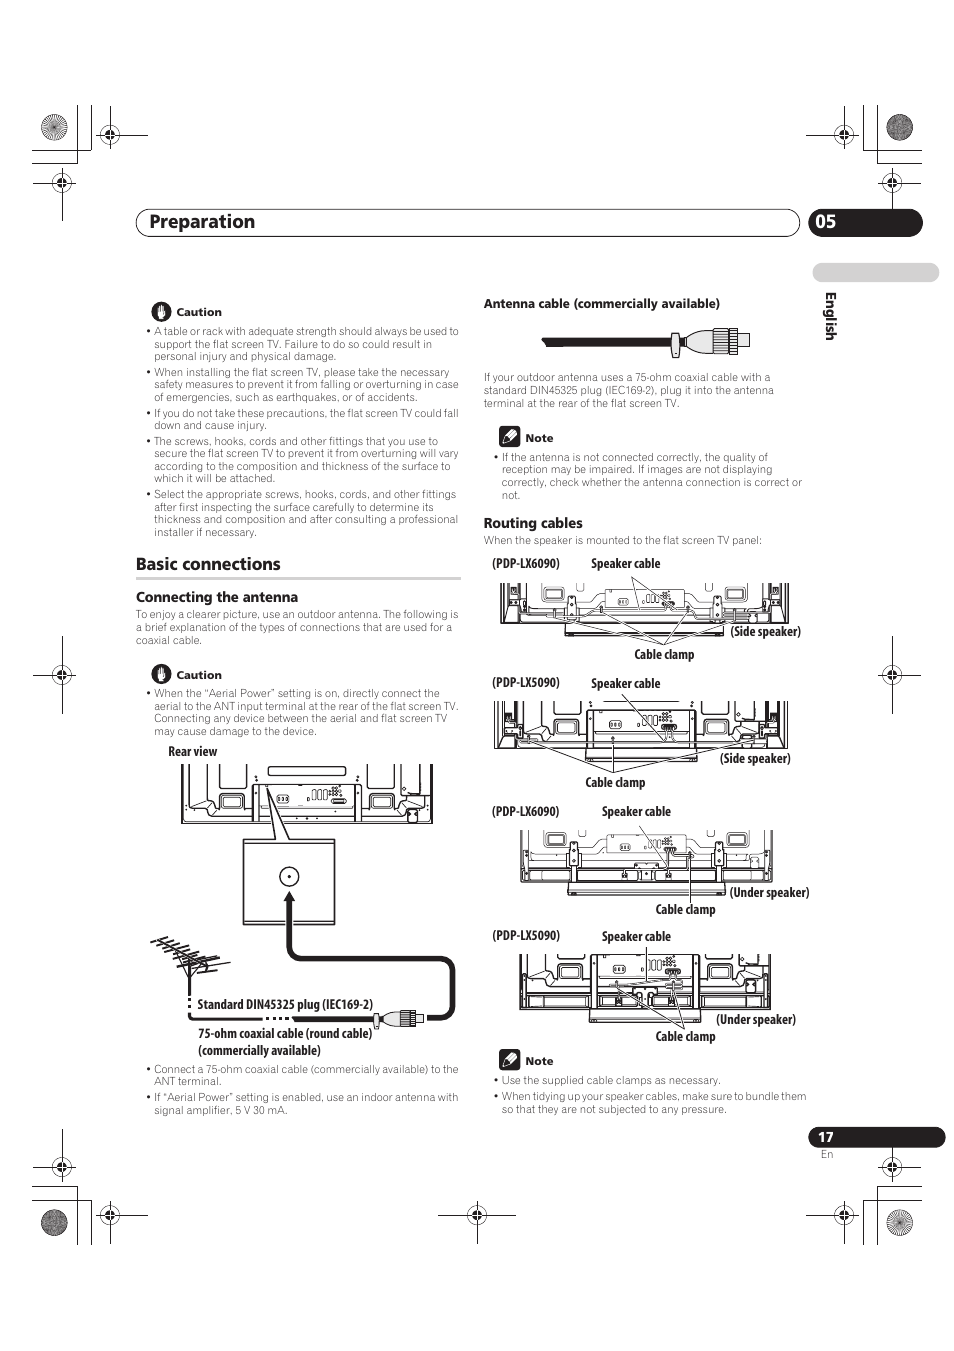 Caution, Basic connections, Connecting the antenna | Pioneer PDP-LX5090  User Manual | Page 17 / 264 | Original mode